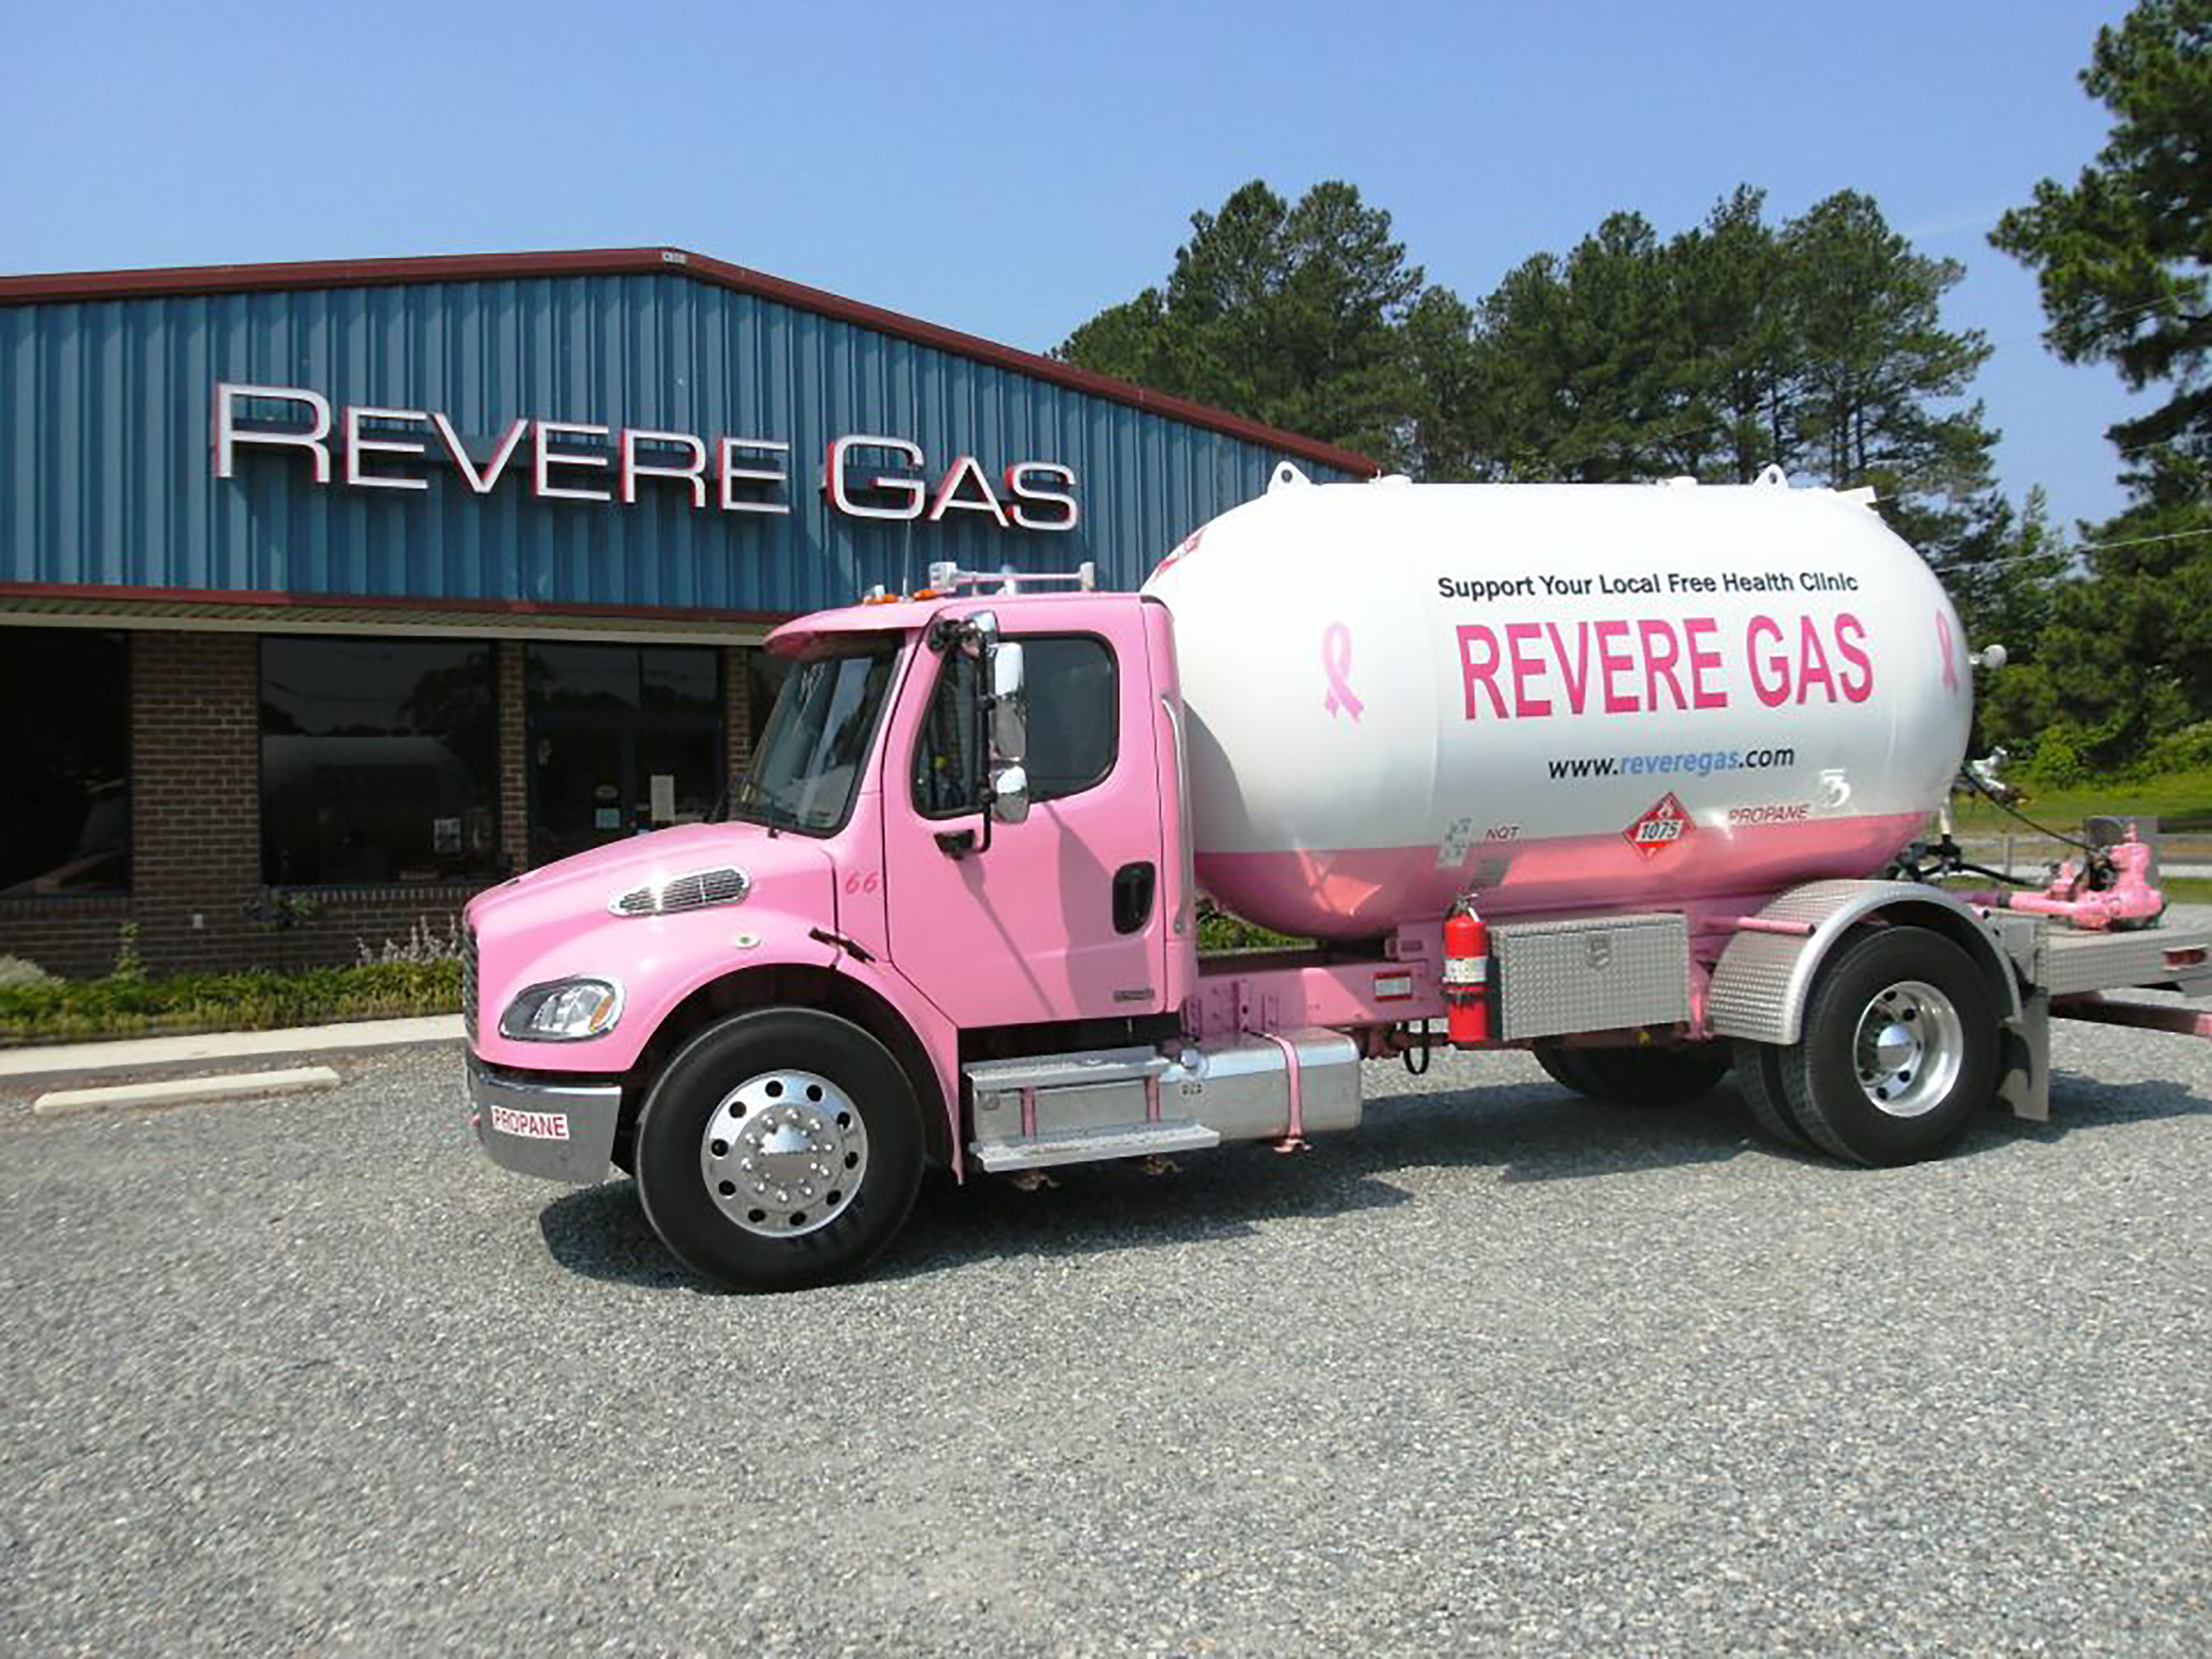 Revere Gas Breast Cancer Support